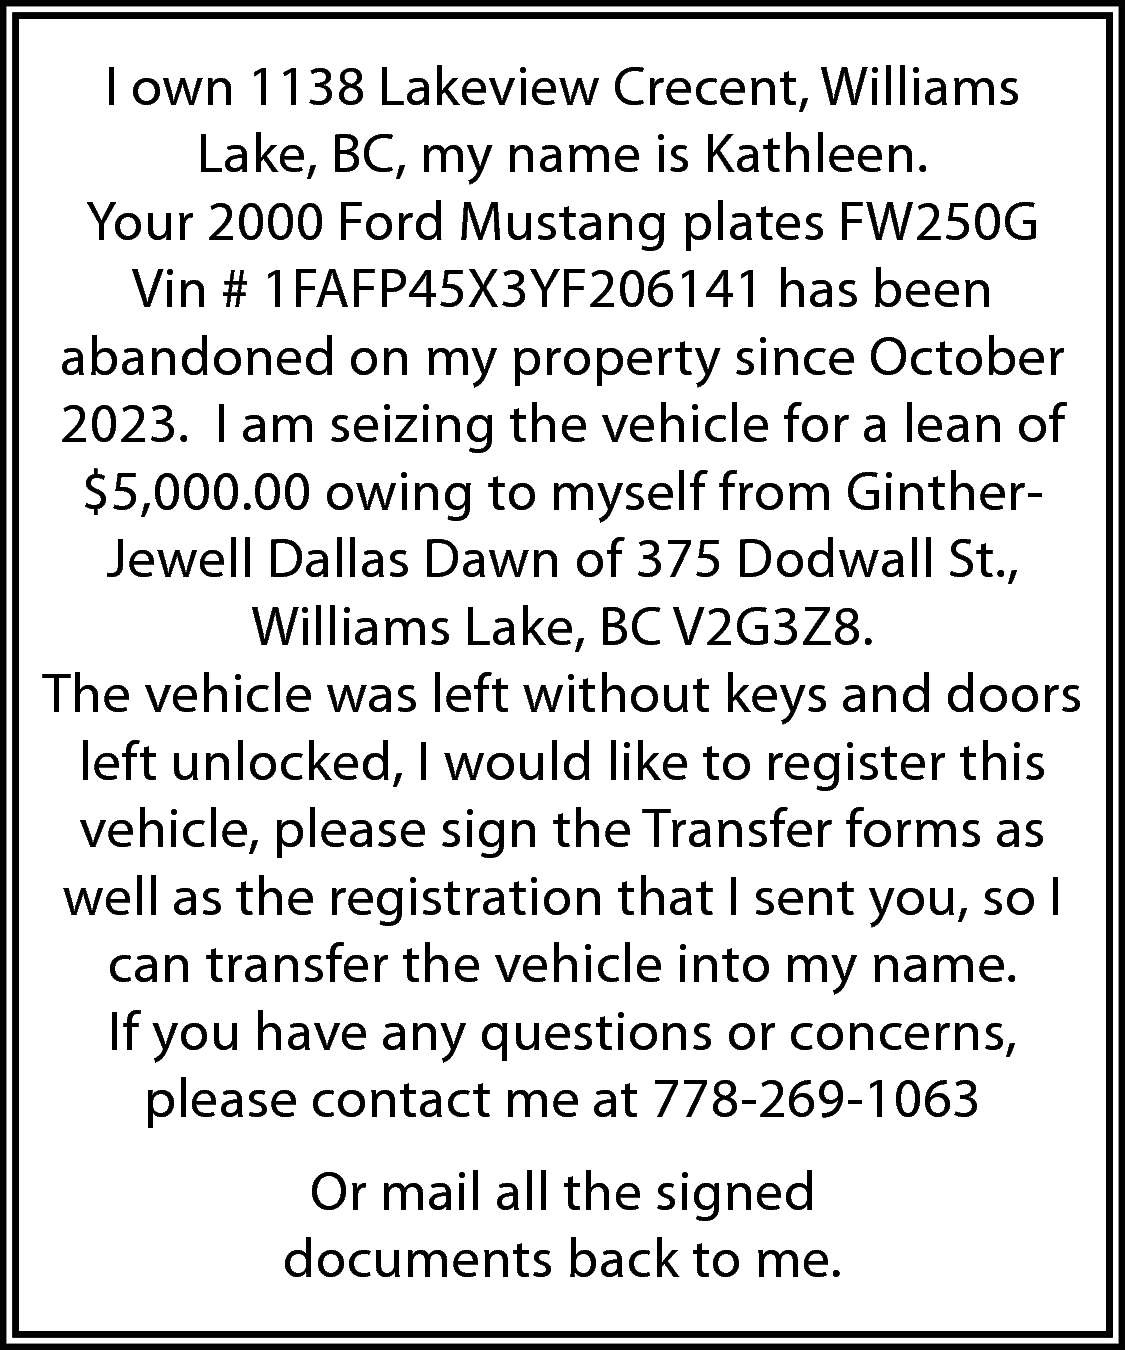 I own 1138 Lakeview Crecent,  I own 1138 Lakeview Crecent, Williams  Lake, BC, my name is Kathleen.  Your 2000 Ford Mustang plates FW250G  Vin # 1FAFP45X3YF206141 has been  abandoned on my property since October  2023. I am seizing the vehicle for a lean of  $5,000.00 owing to myself from GintherJewell Dallas Dawn of 375 Dodwall St.,  Williams Lake, BC V2G3Z8.  The vehicle was left without keys and doors  left unlocked, I would like to register this  vehicle, please sign the Transfer forms as  well as the registration that I sent you, so I  can transfer the vehicle into my name.  If you have any questions or concerns,  please contact me at 778-269-1063  Or mail all the signed  documents back to me.    